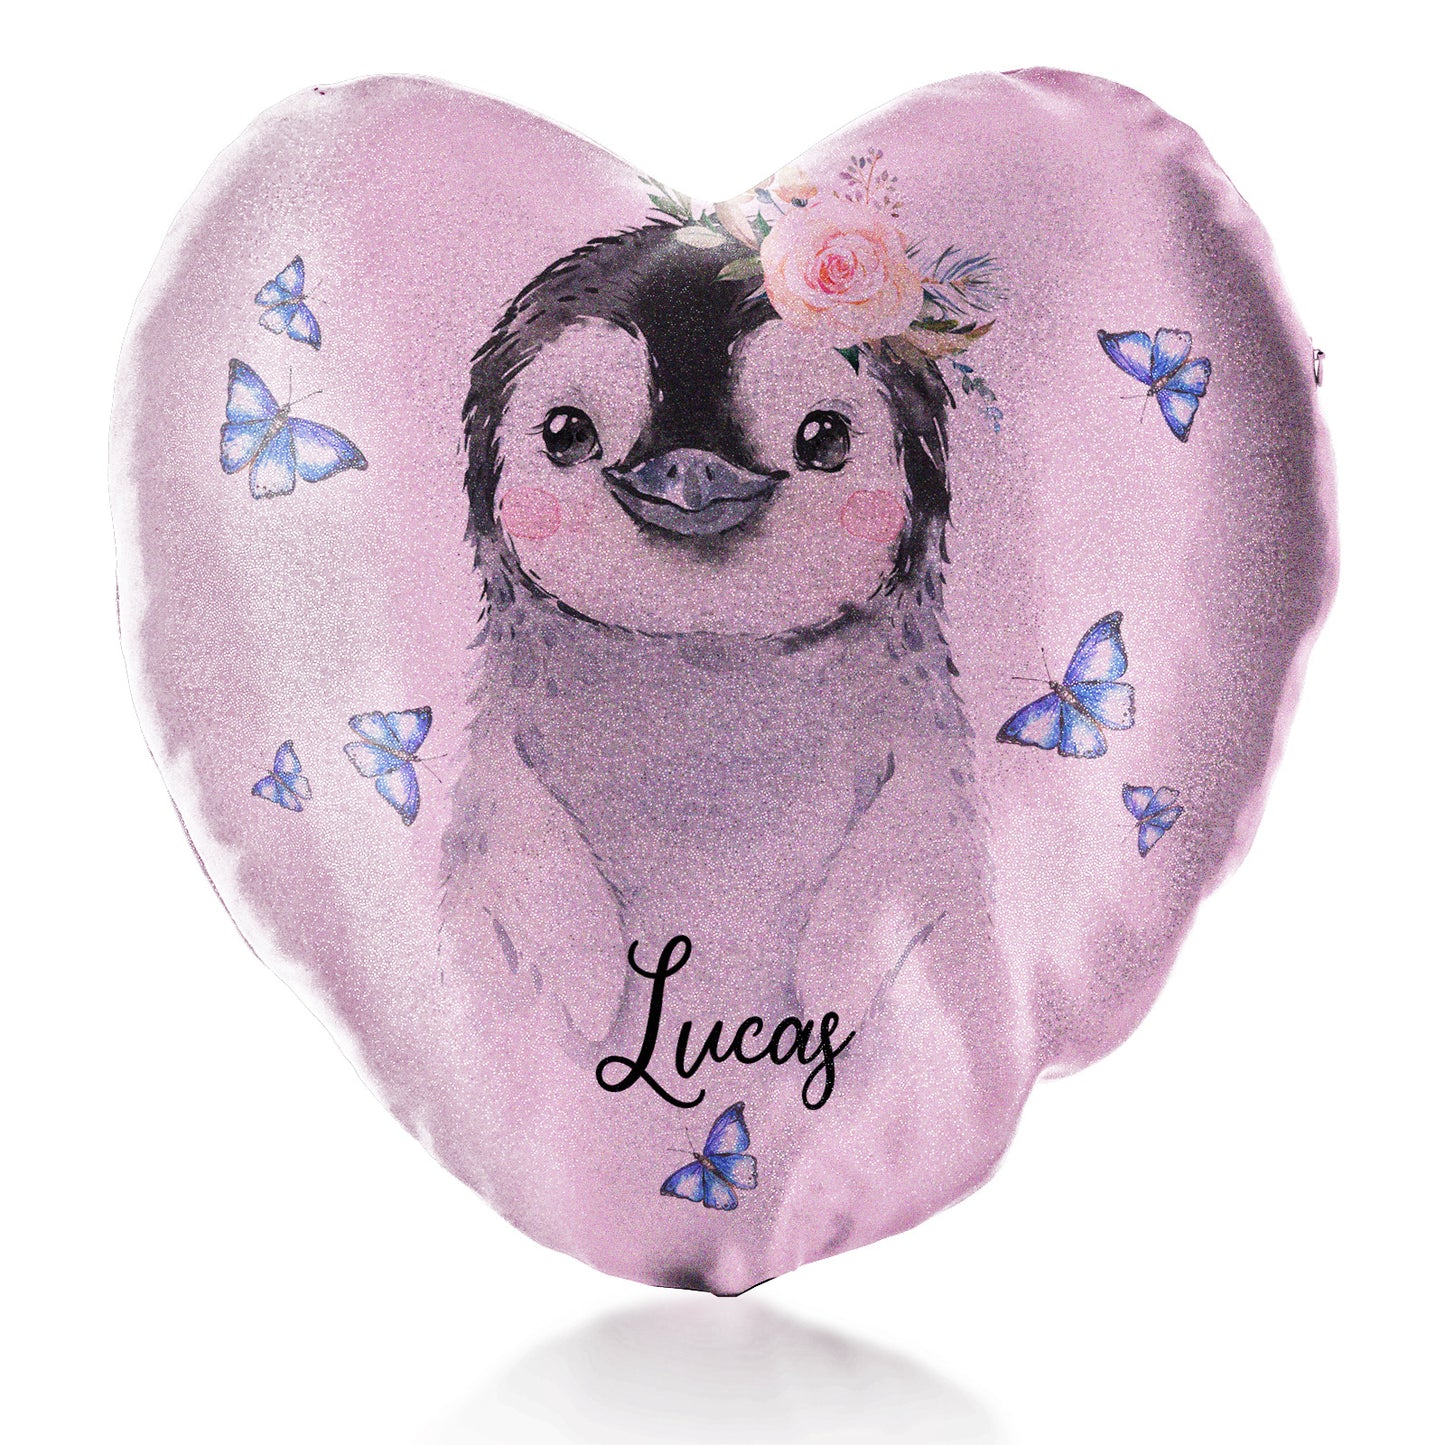 Personalised Glitter Heart Cushion with Grey Penguin Blue Butterflies and Cute Text